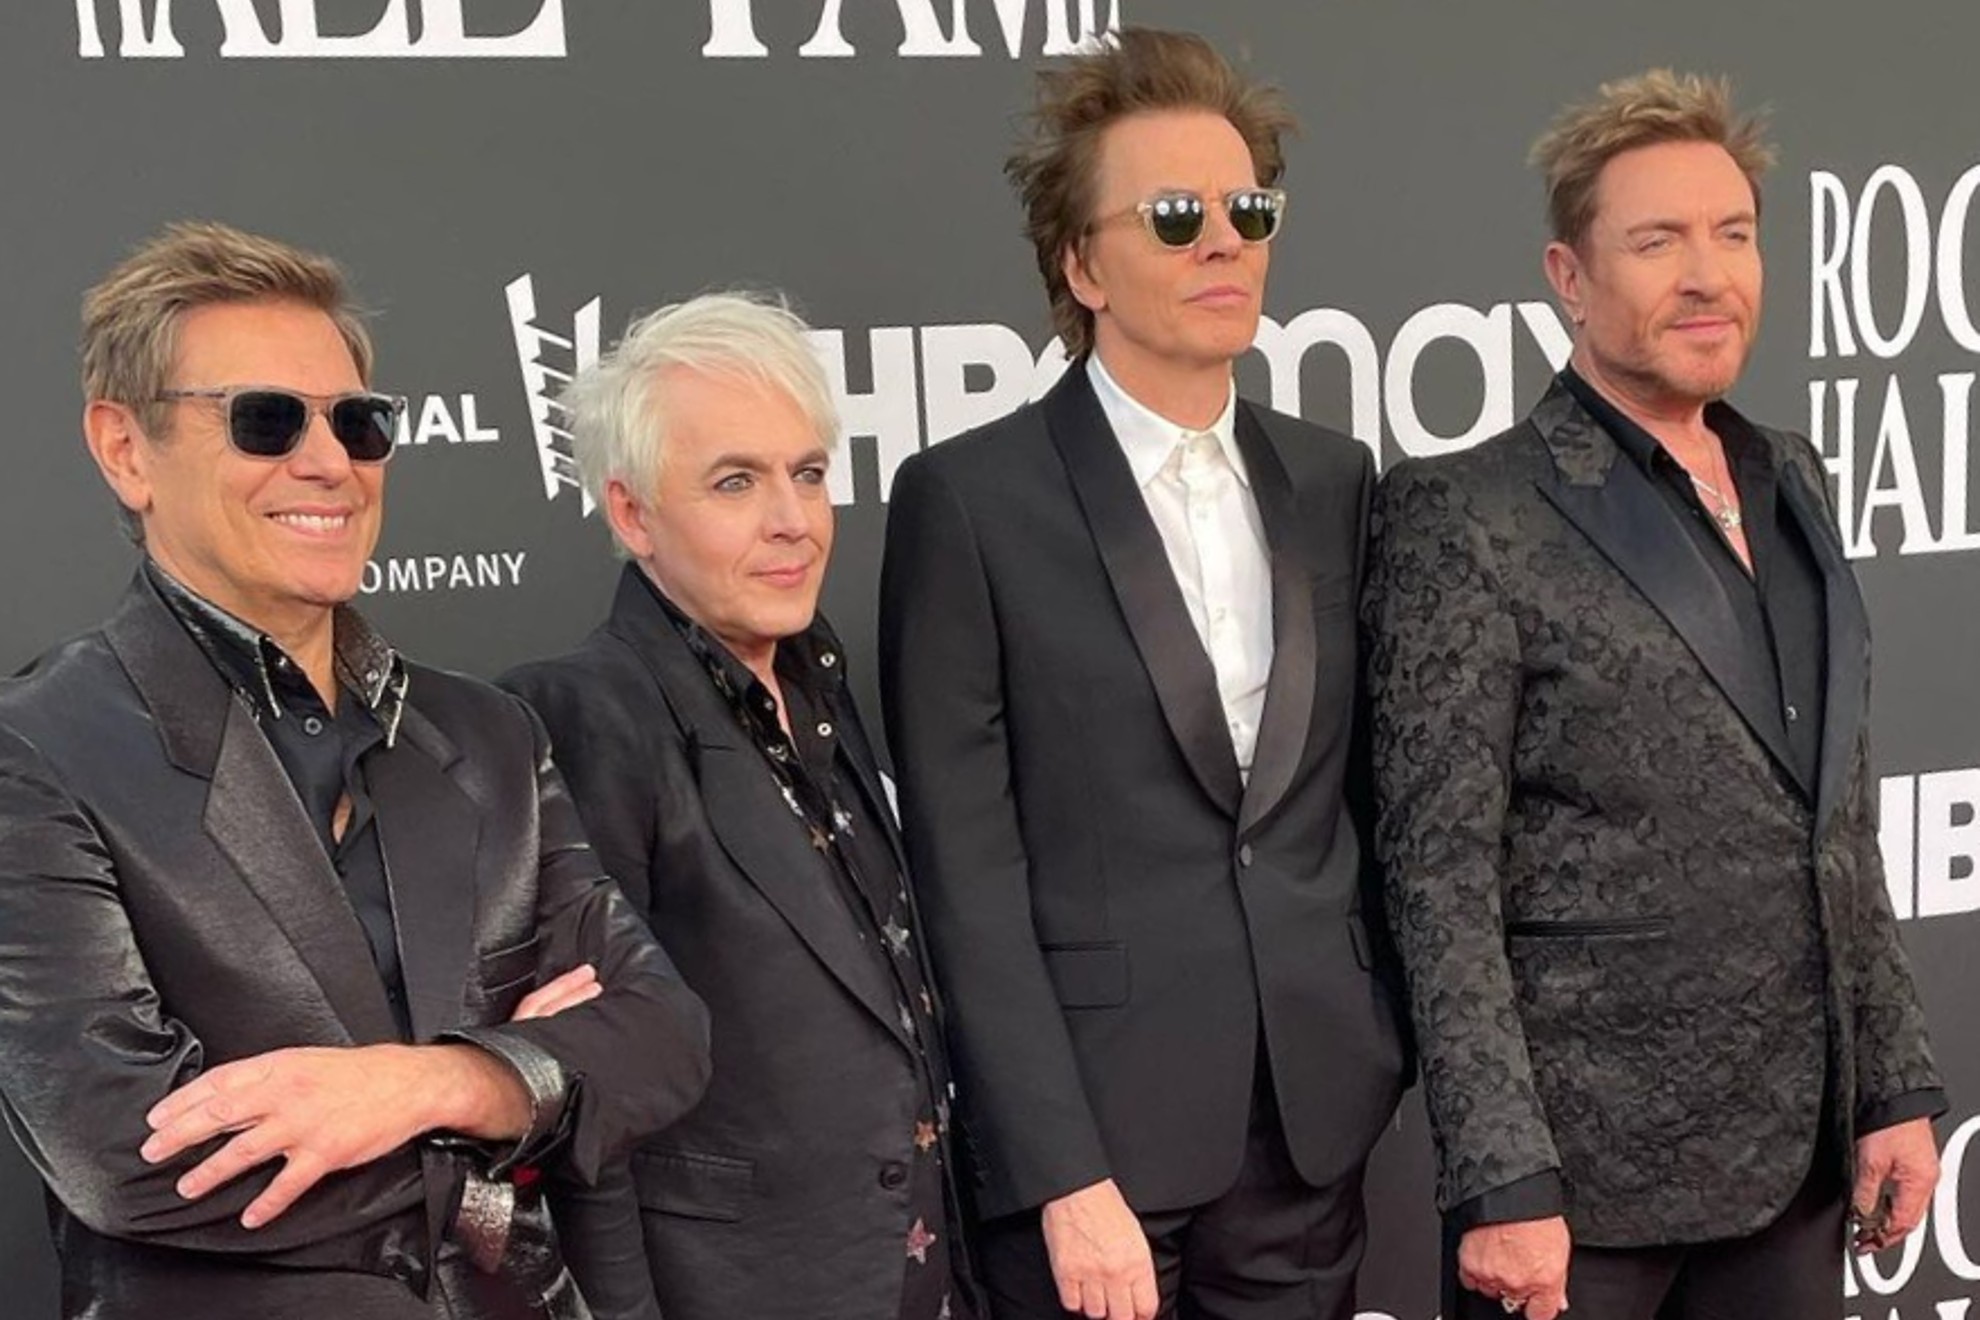 Duran Duran at the Rock & Roll Hall of Fame.